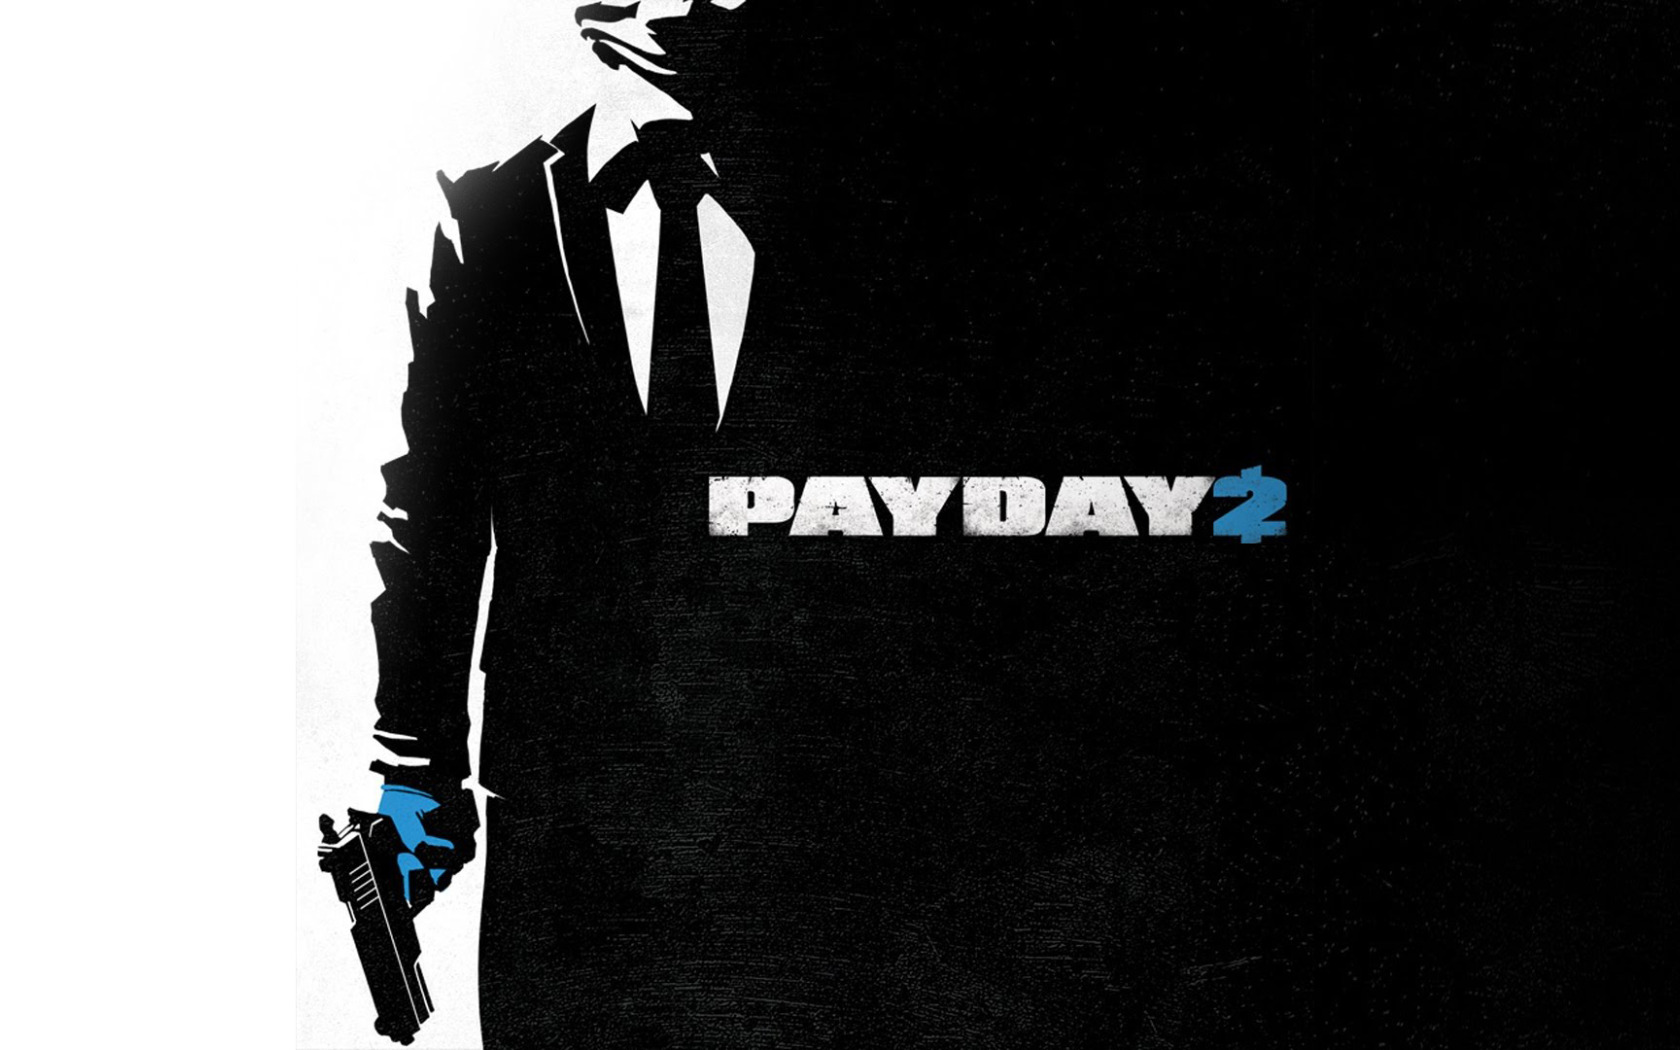 Dead man hands payday 2 фото 64